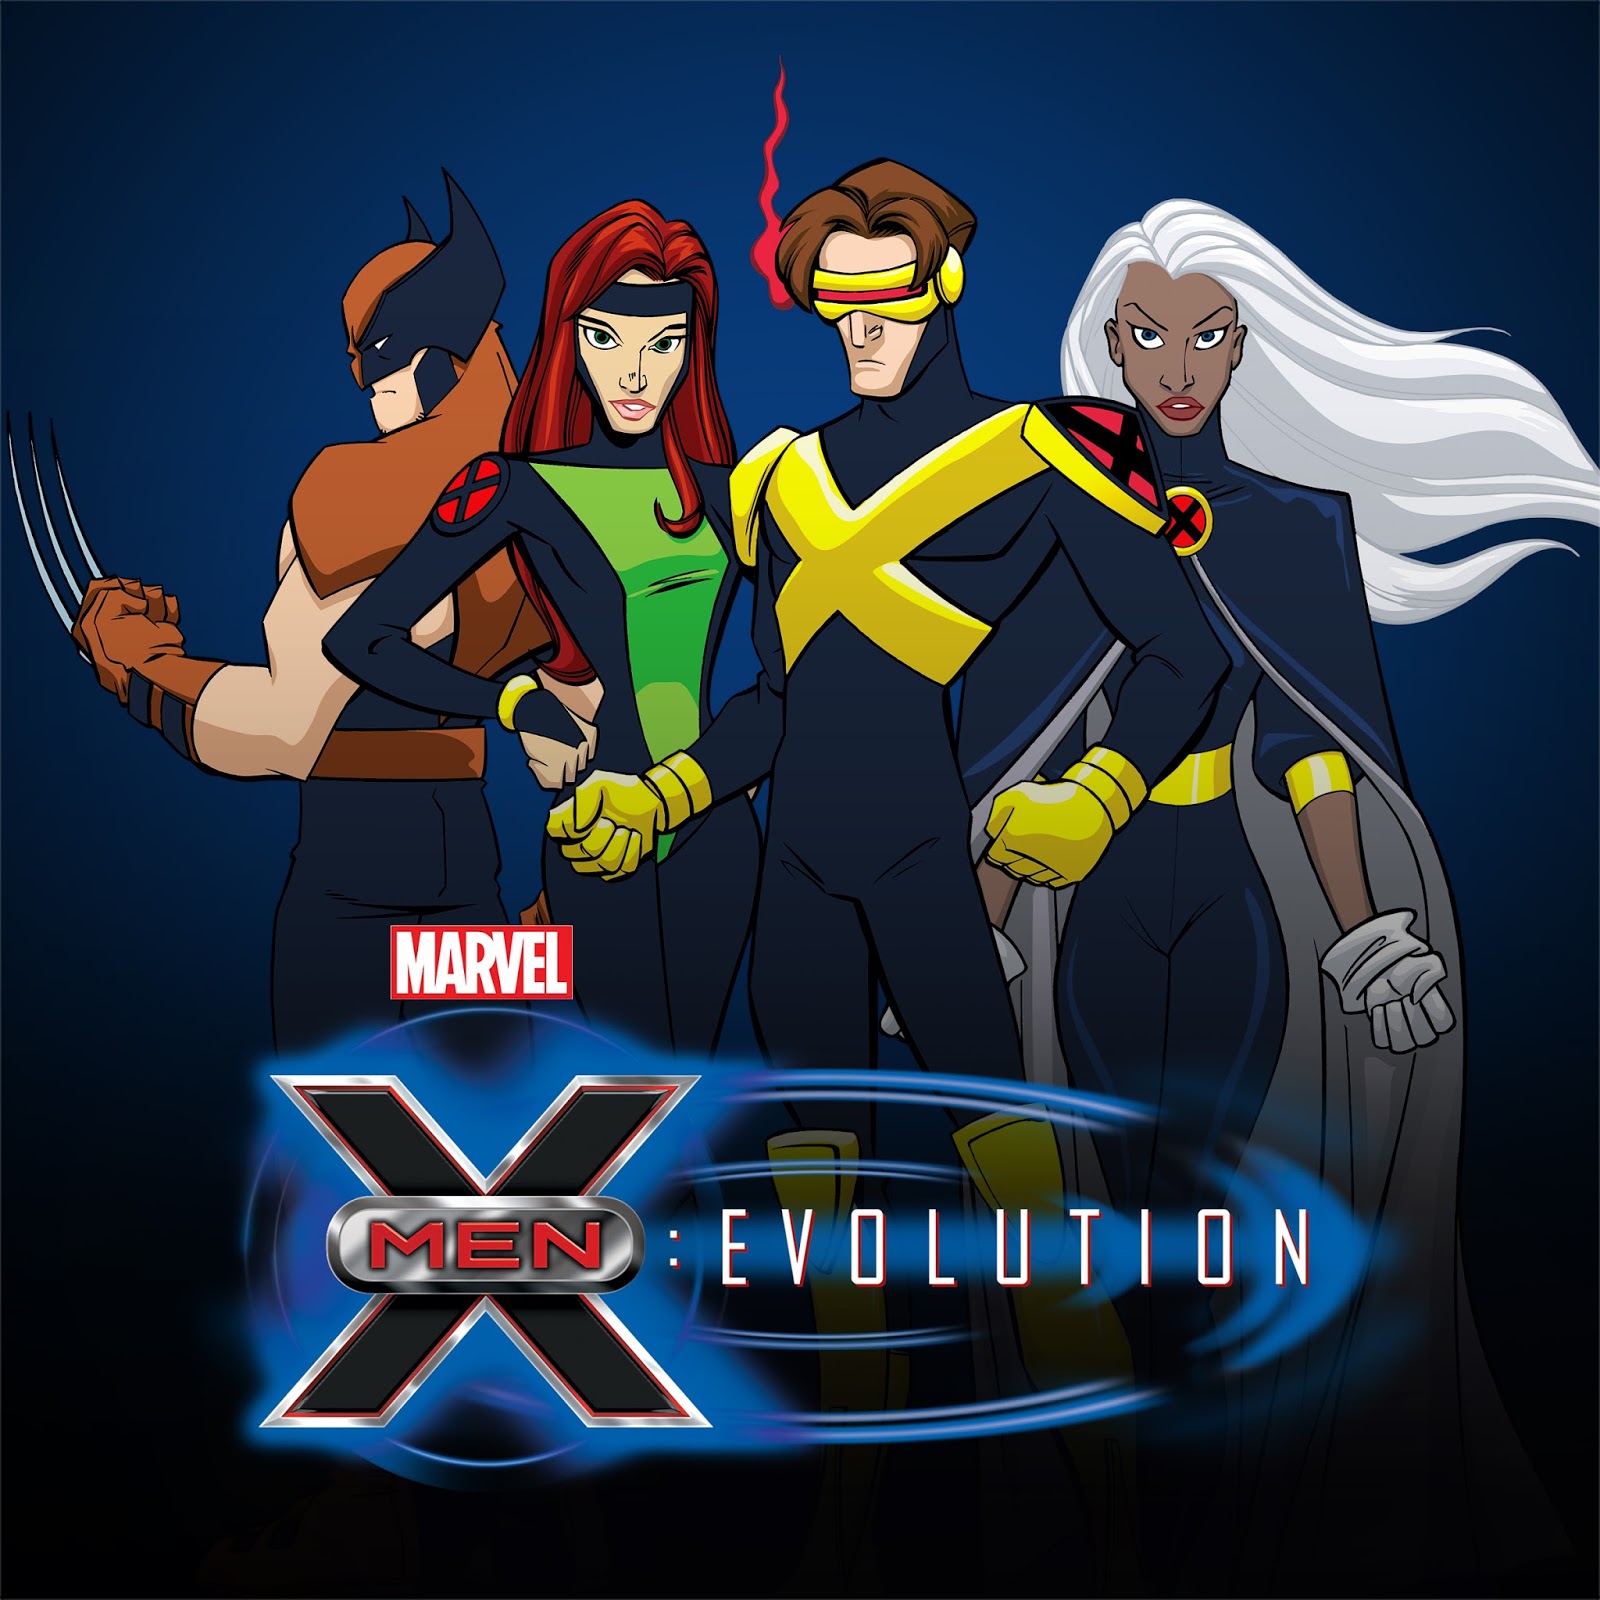 View, Download, Rate, and Comment on this X-men: Evolution pfp. 